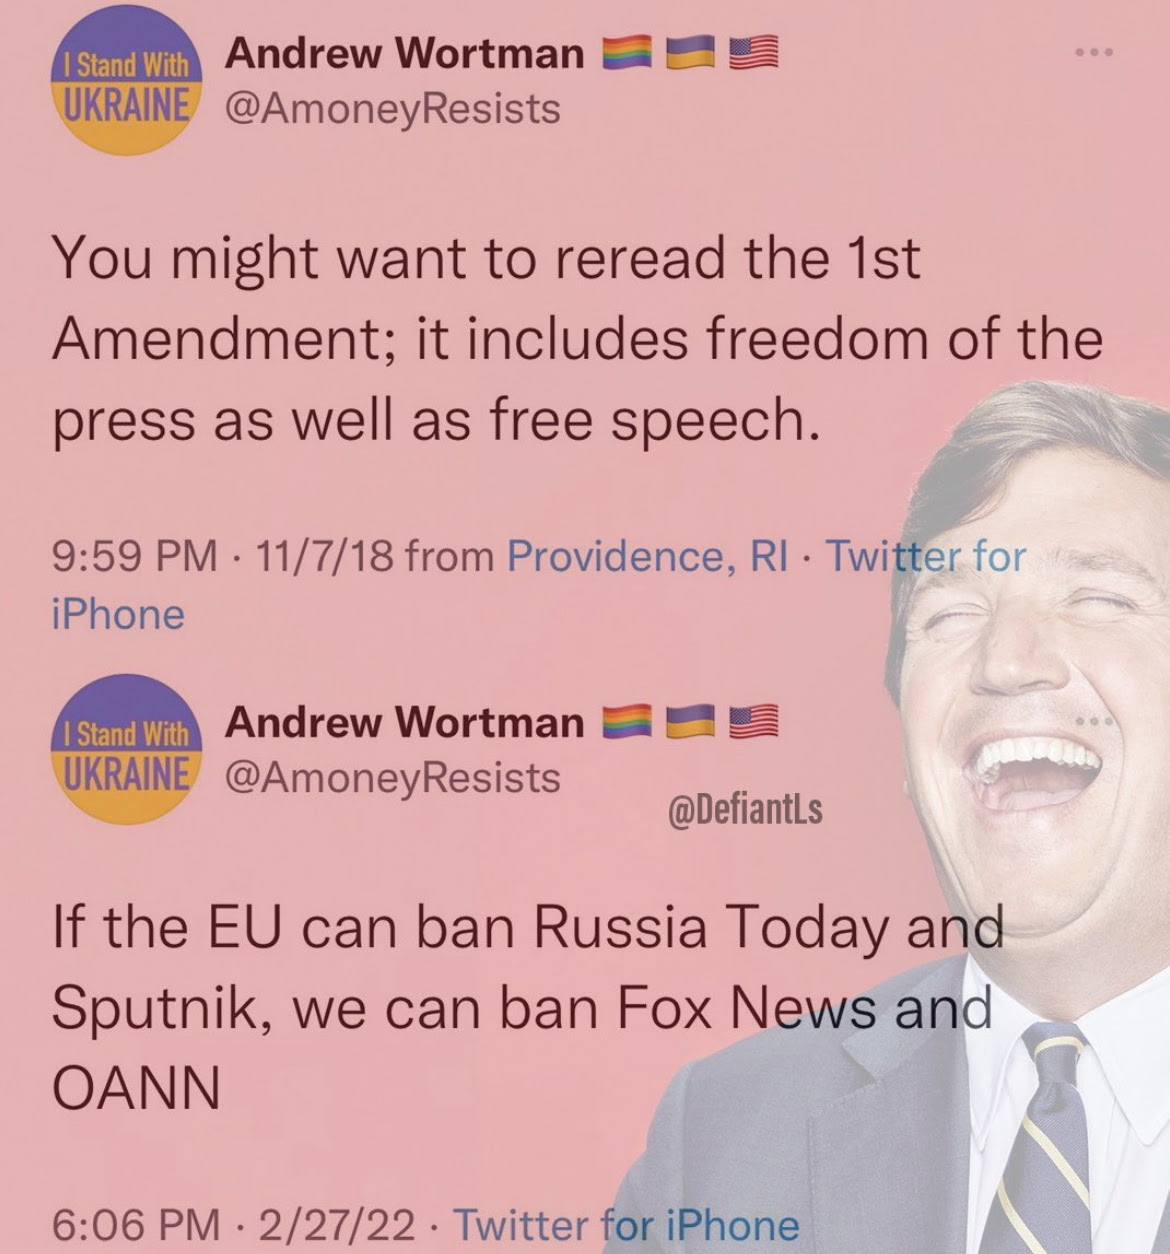 Hypocrite Andrew Wortman first says ethat freedom of speech and the freedom of the press are sacrosanct then wants to ban Fox News and OANN.